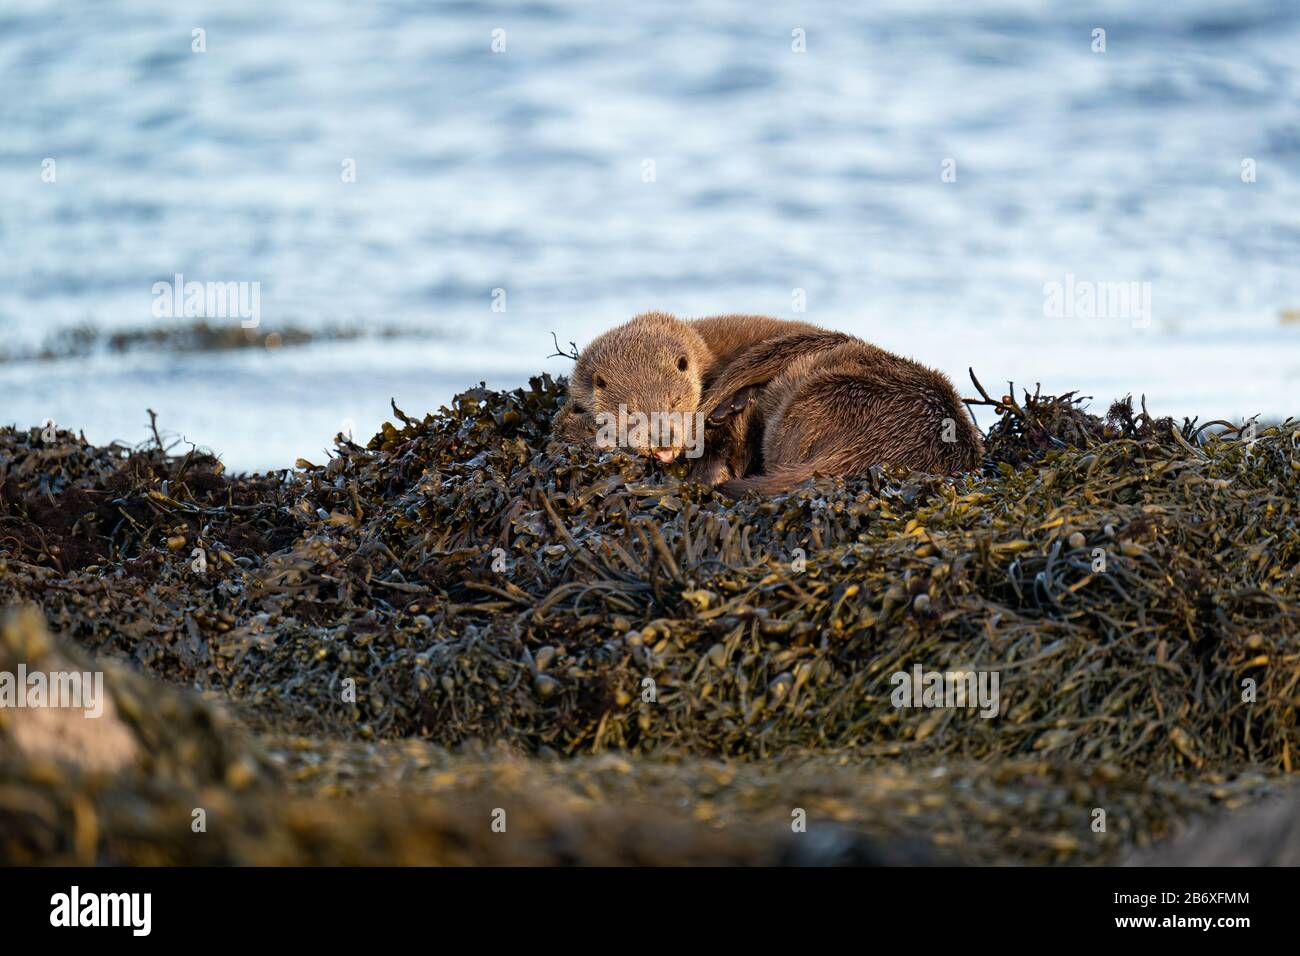 European Otter  (Lutra lutra) cub lying on top of its mother on a bed of kelp asleeping wit its mouth open Stock Photo